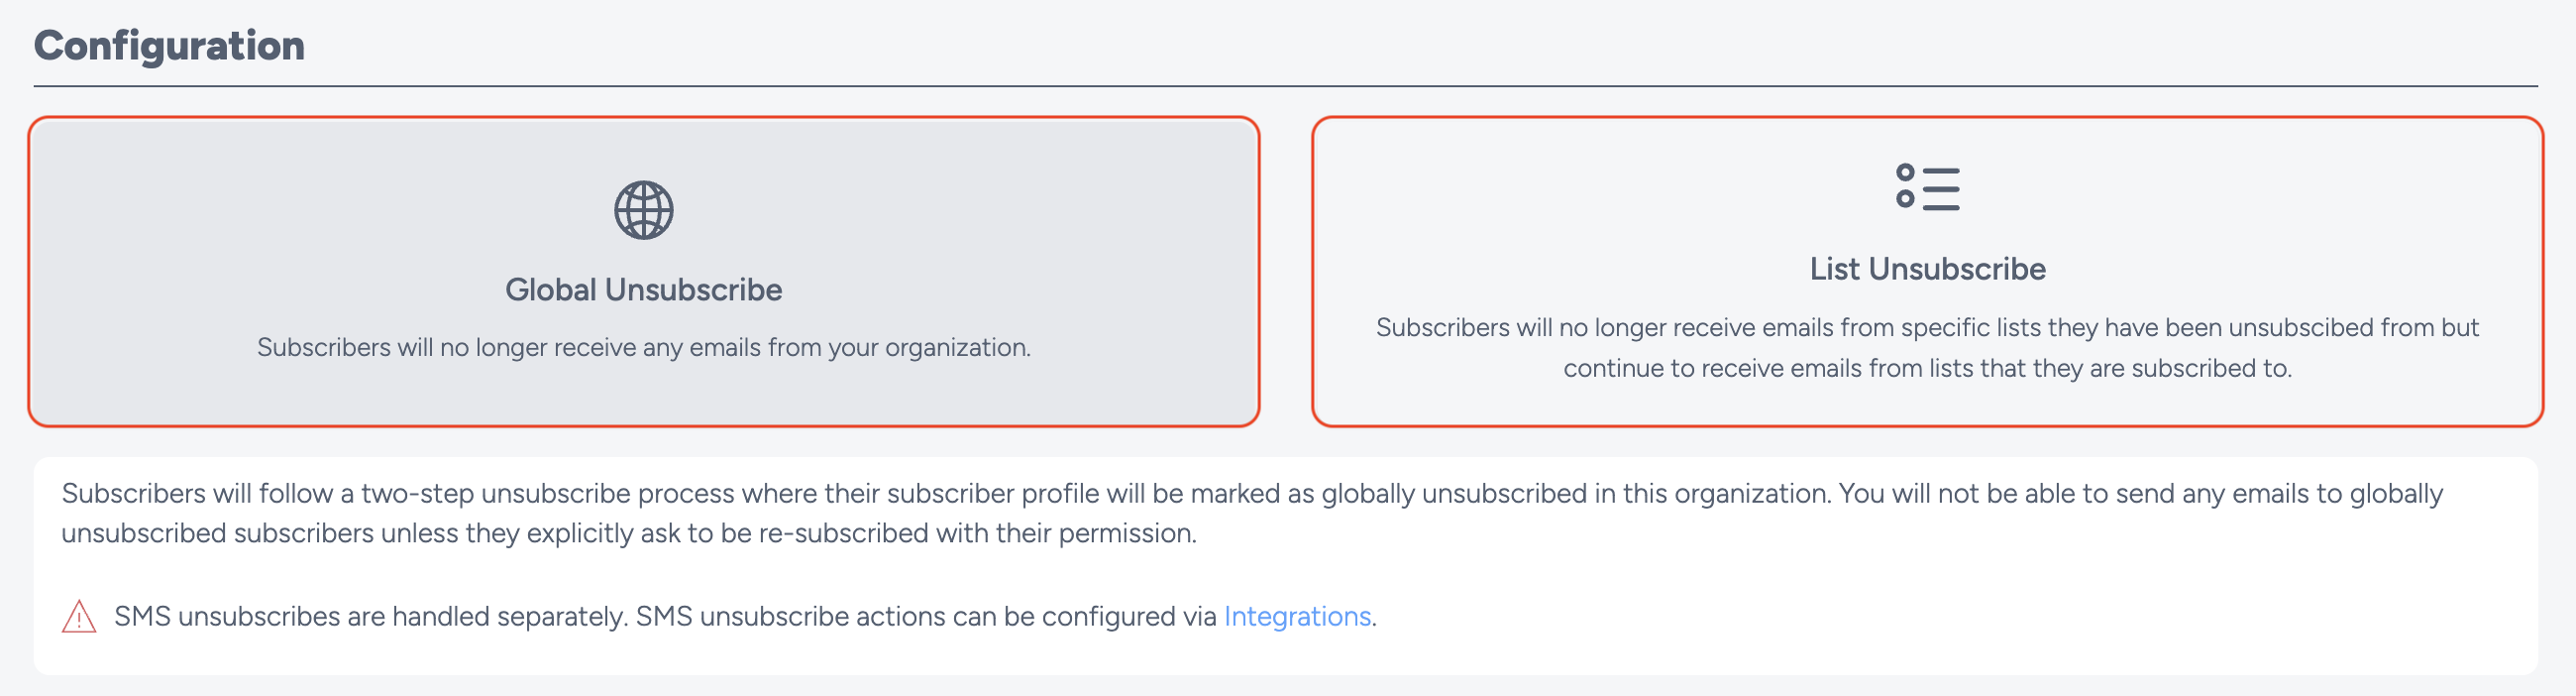 Unsubscribe_Configuration